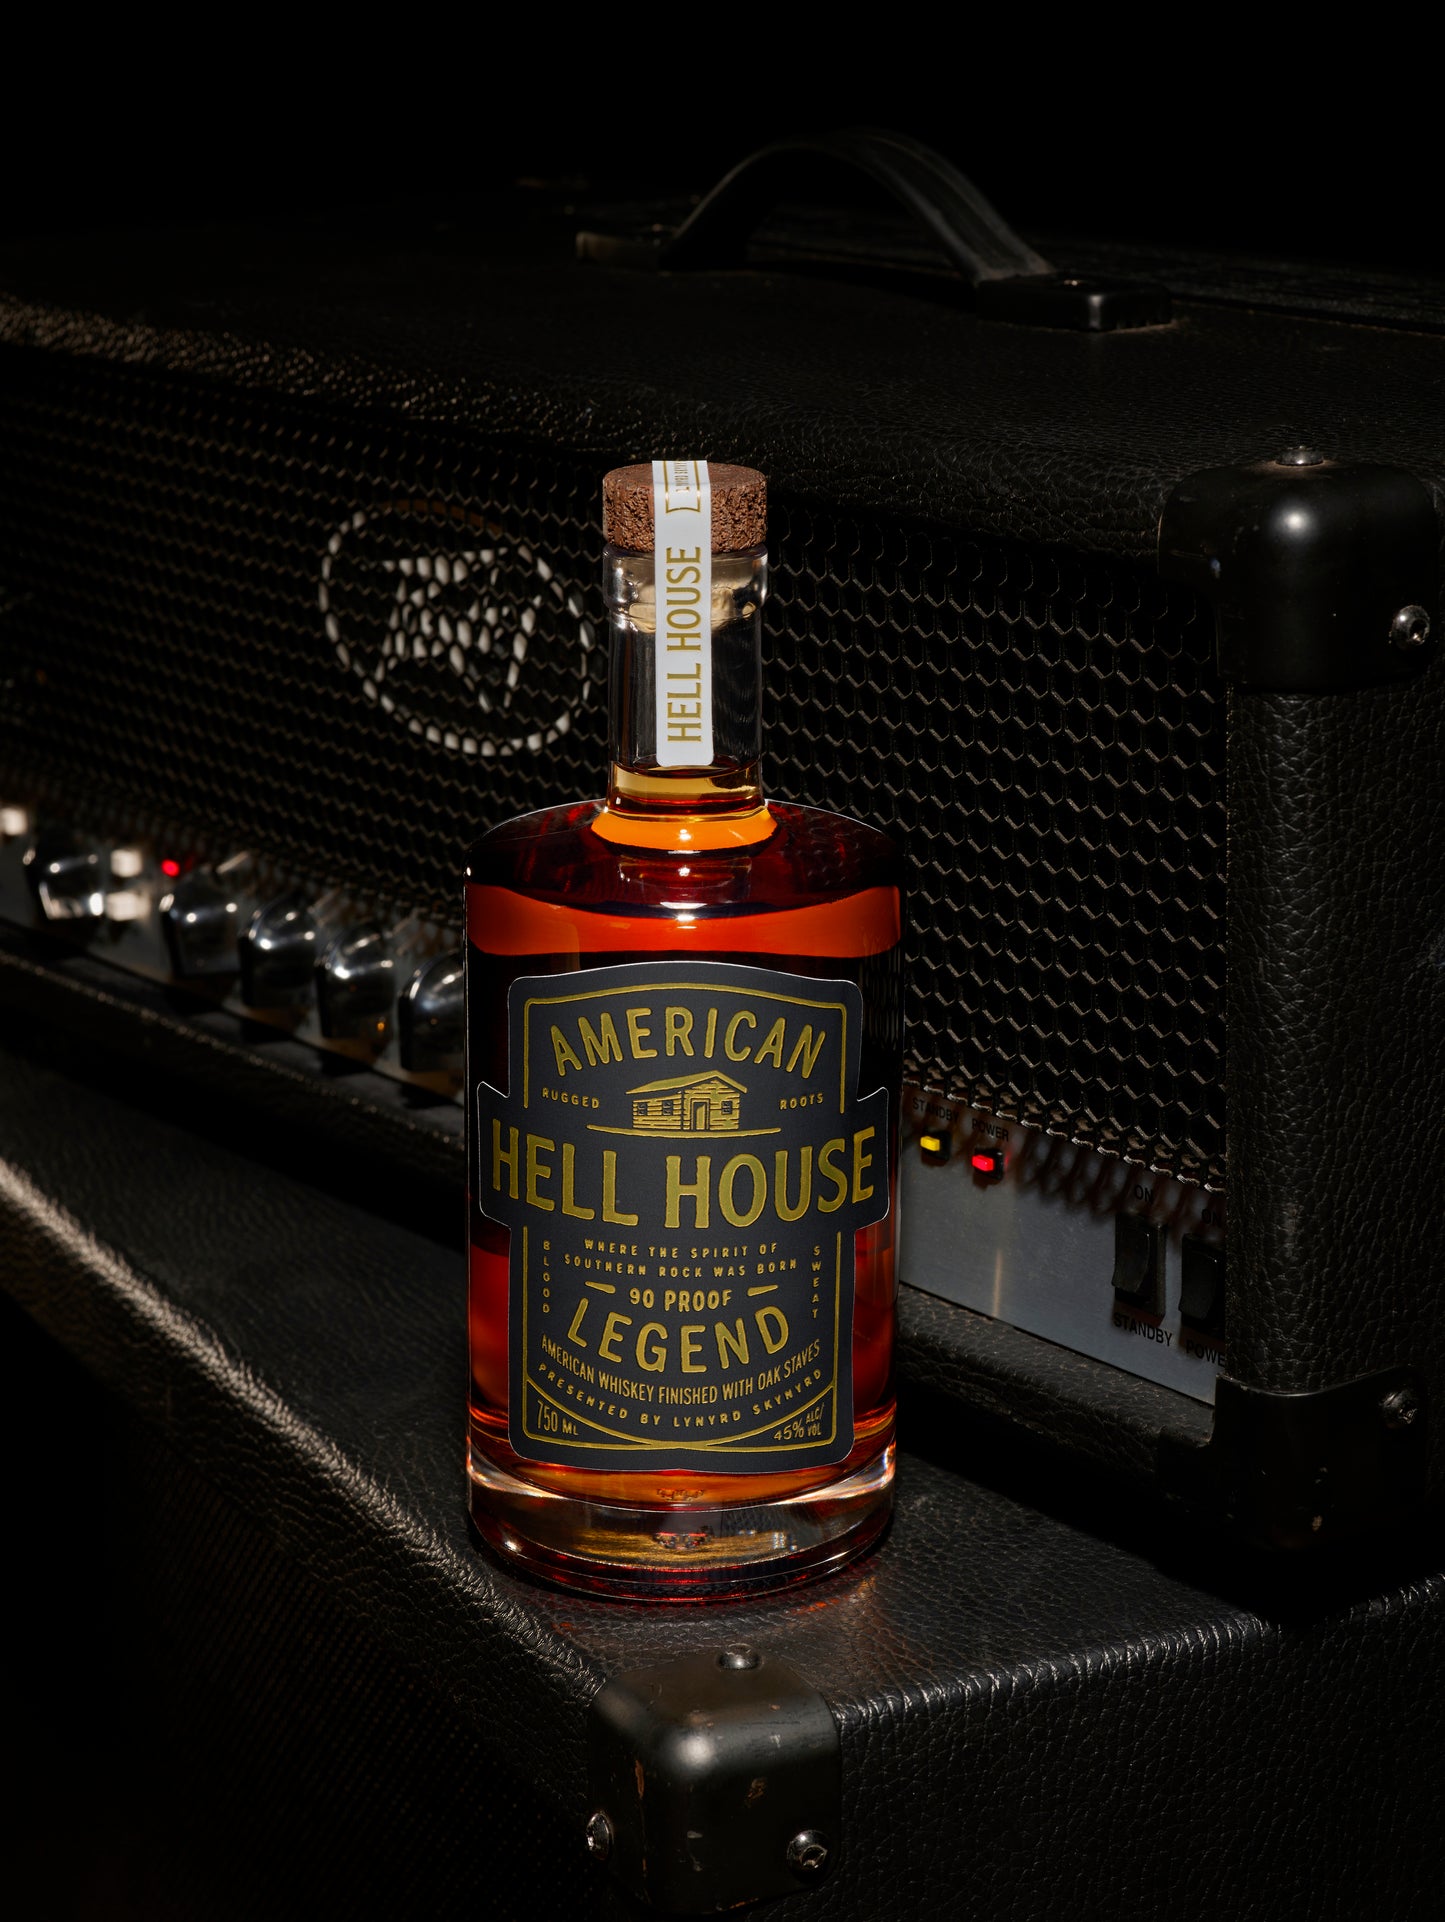 Hell House American Whiskey